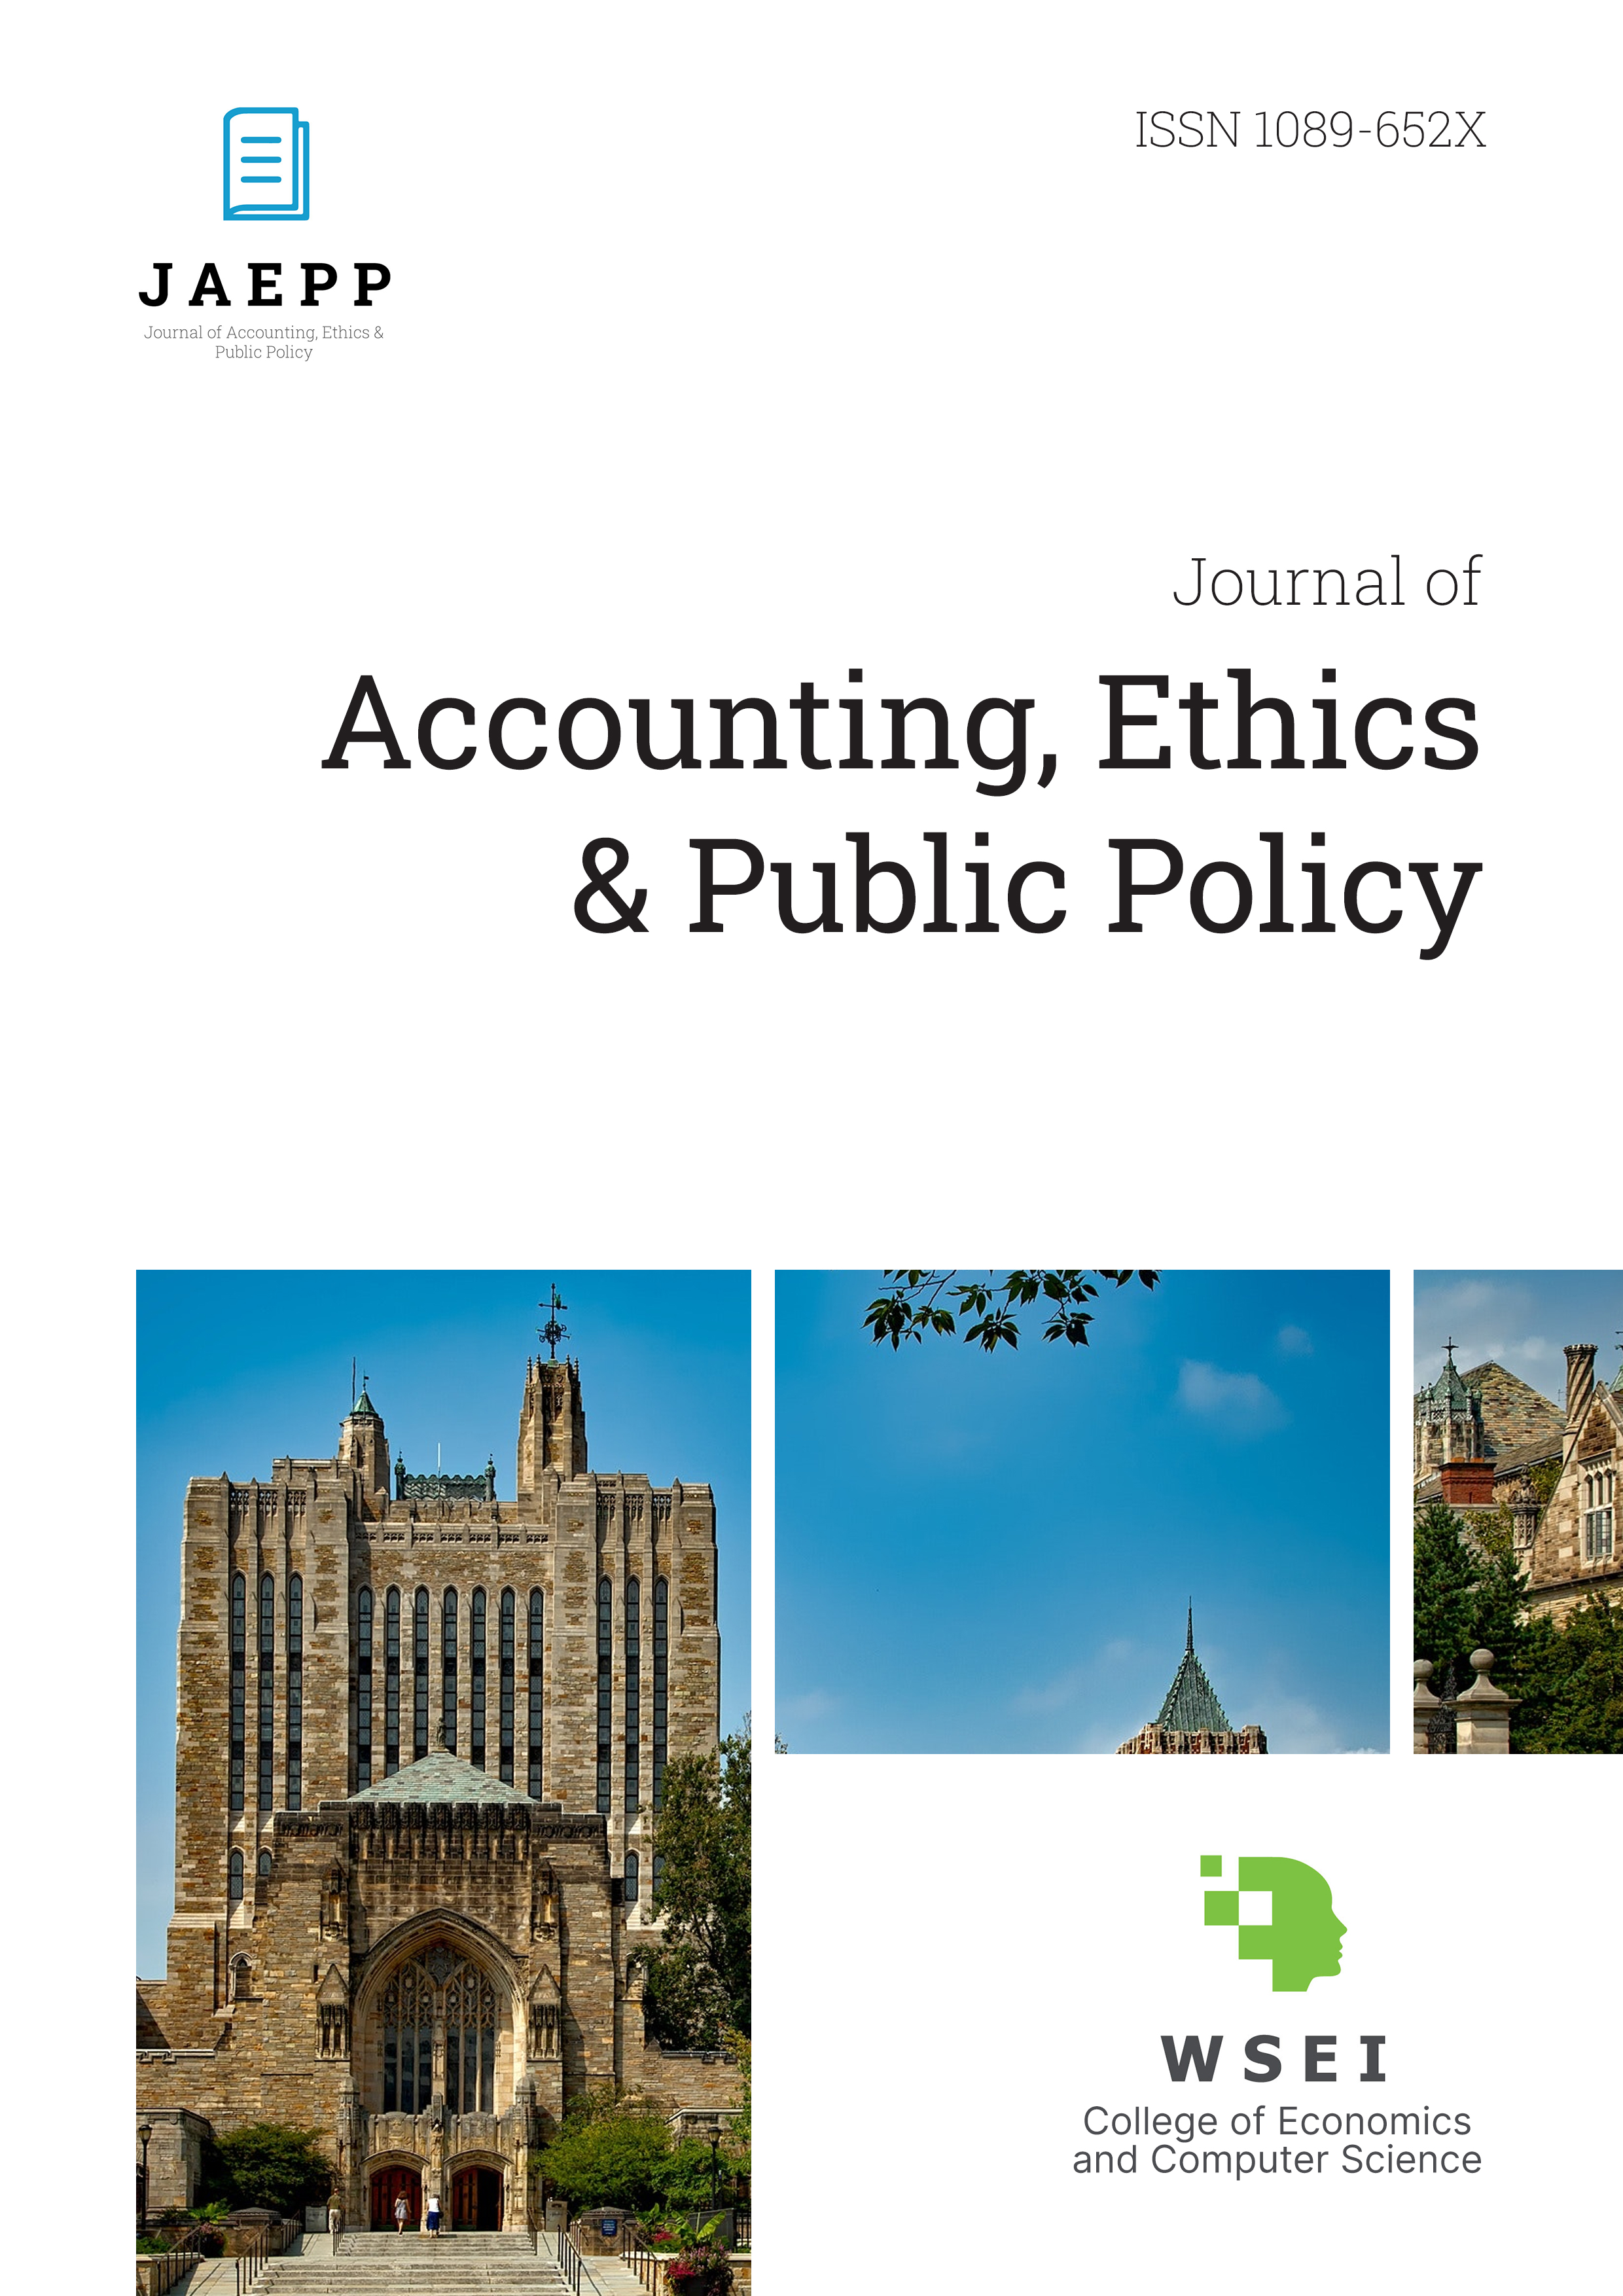 					View Vol. 20 No. 1 (2019): Journal of Accounting, Ethics & Public Policy, JAEPP
				